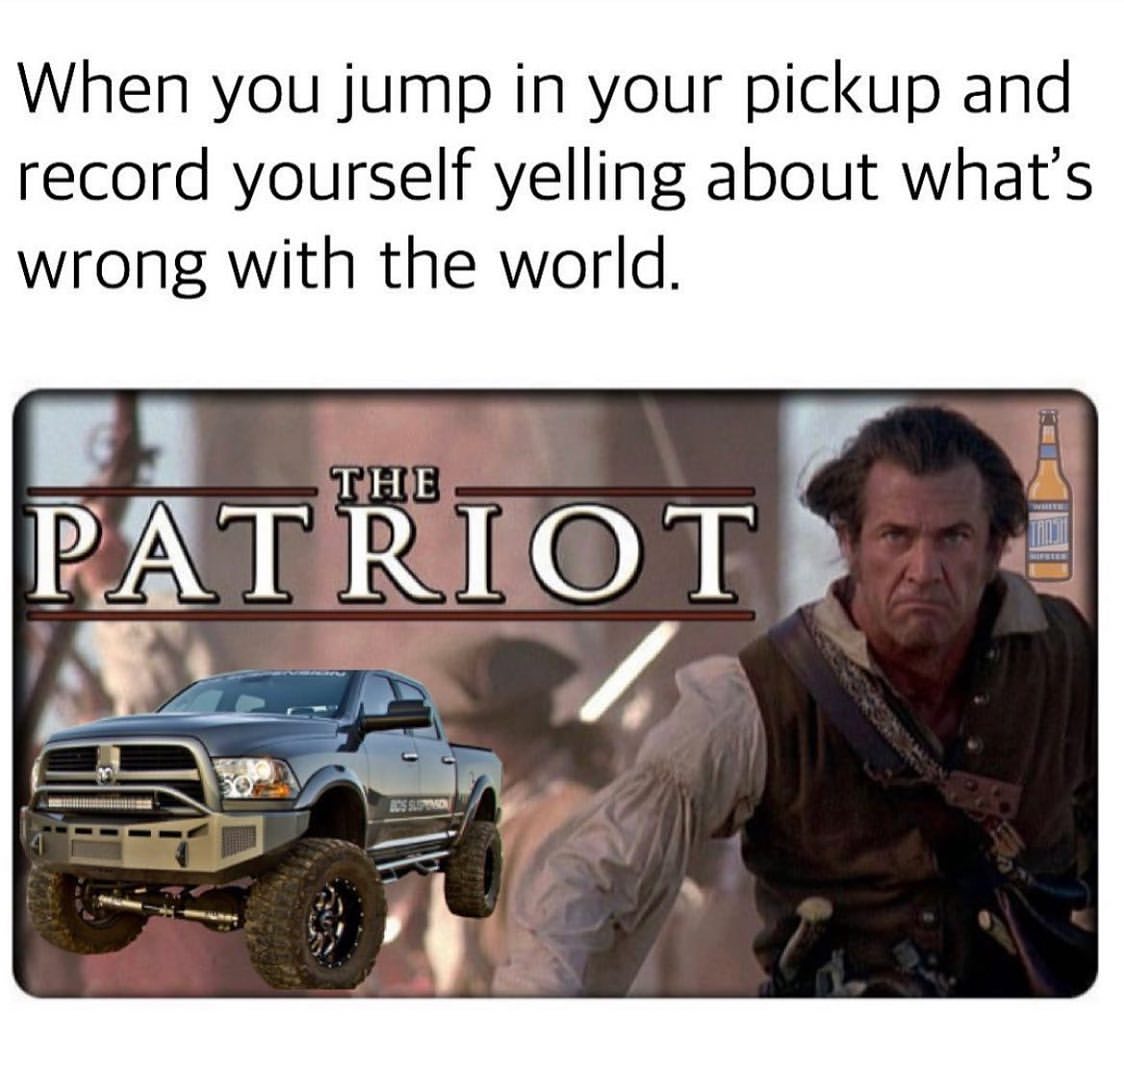 When you jump in your pickup and record yourself yelling about what's wrong with the world.